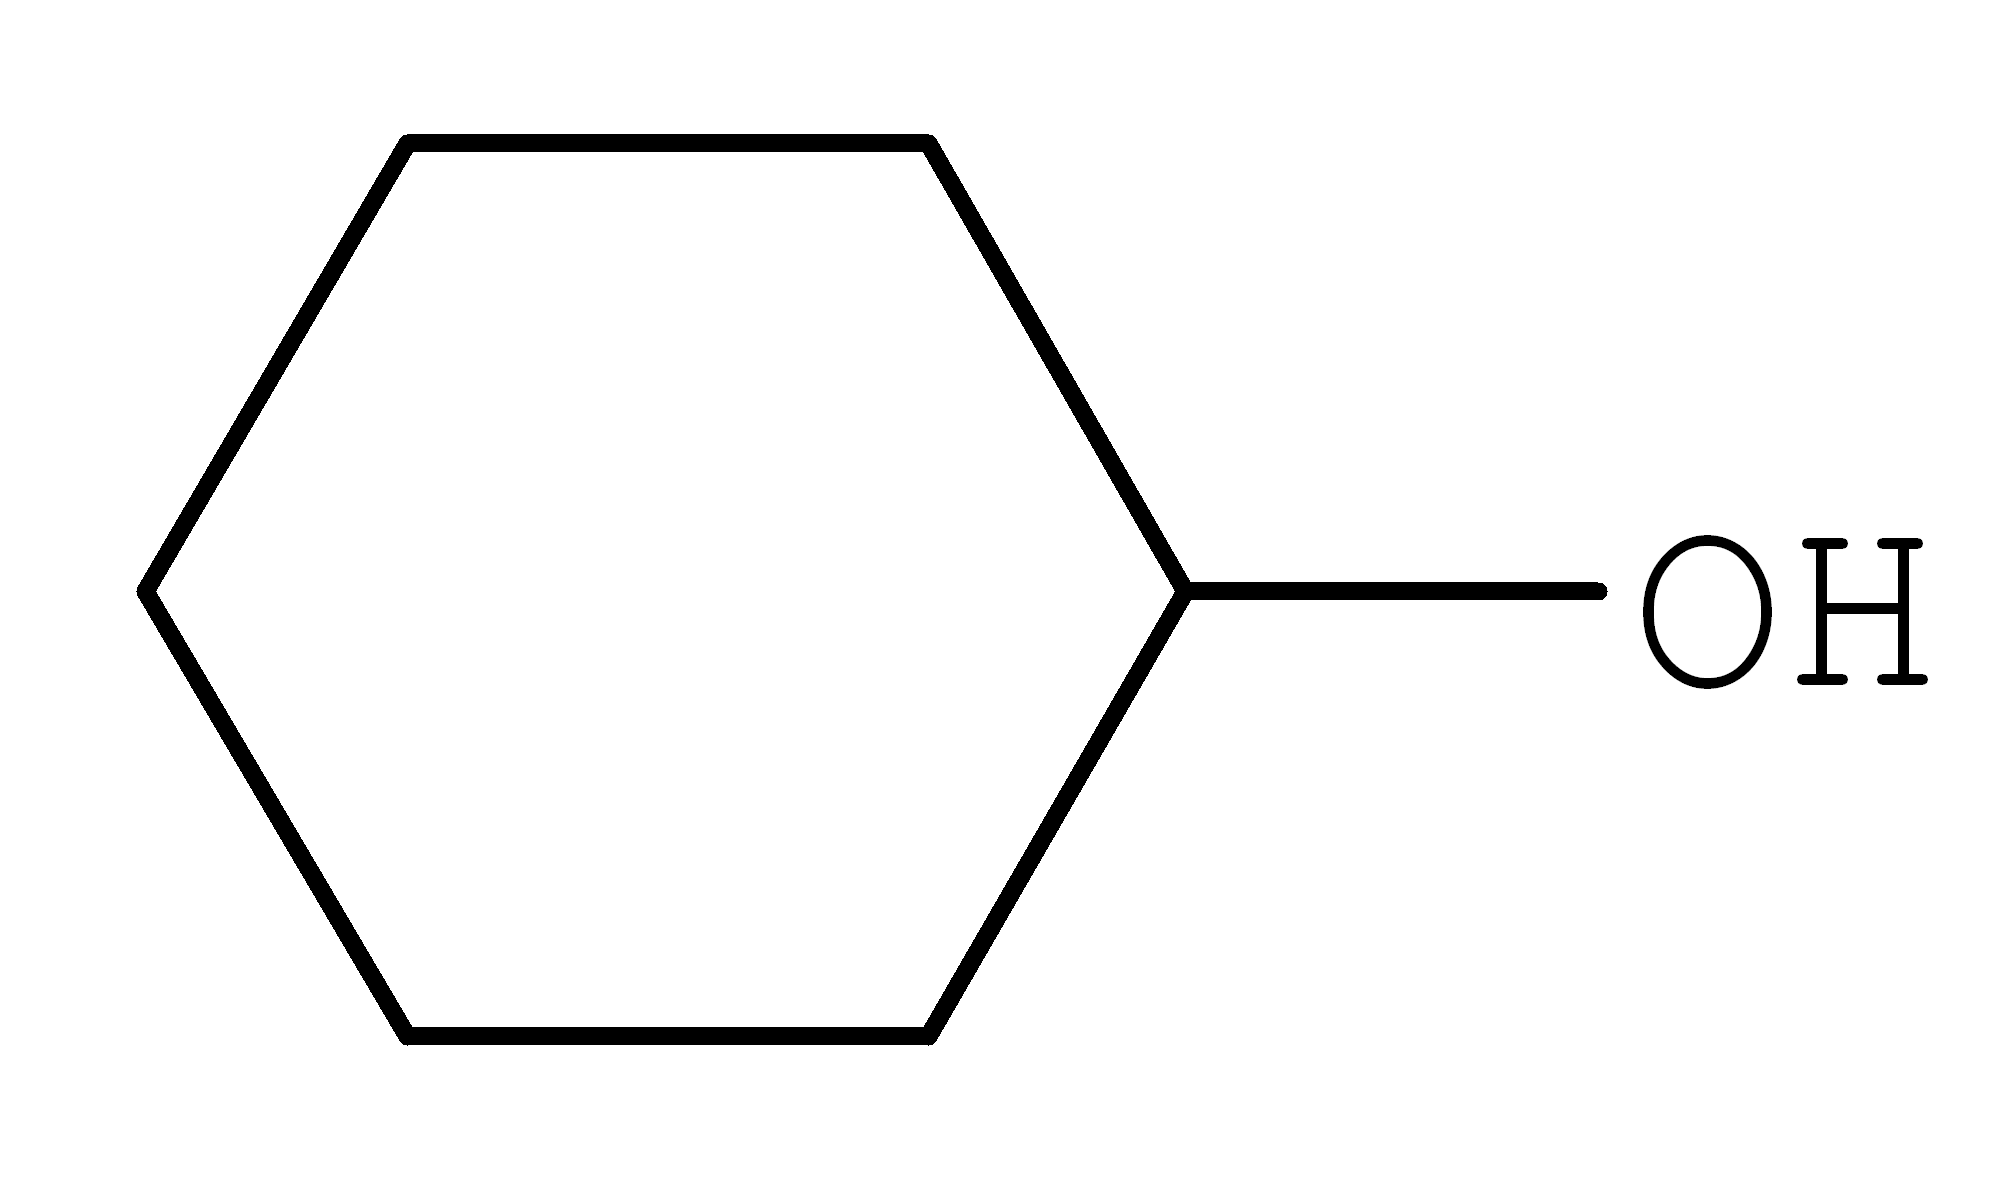 https://chemistry.stackexchange.com/questions/22295/is-cyclohexol-the-same-as-cyclohexanol